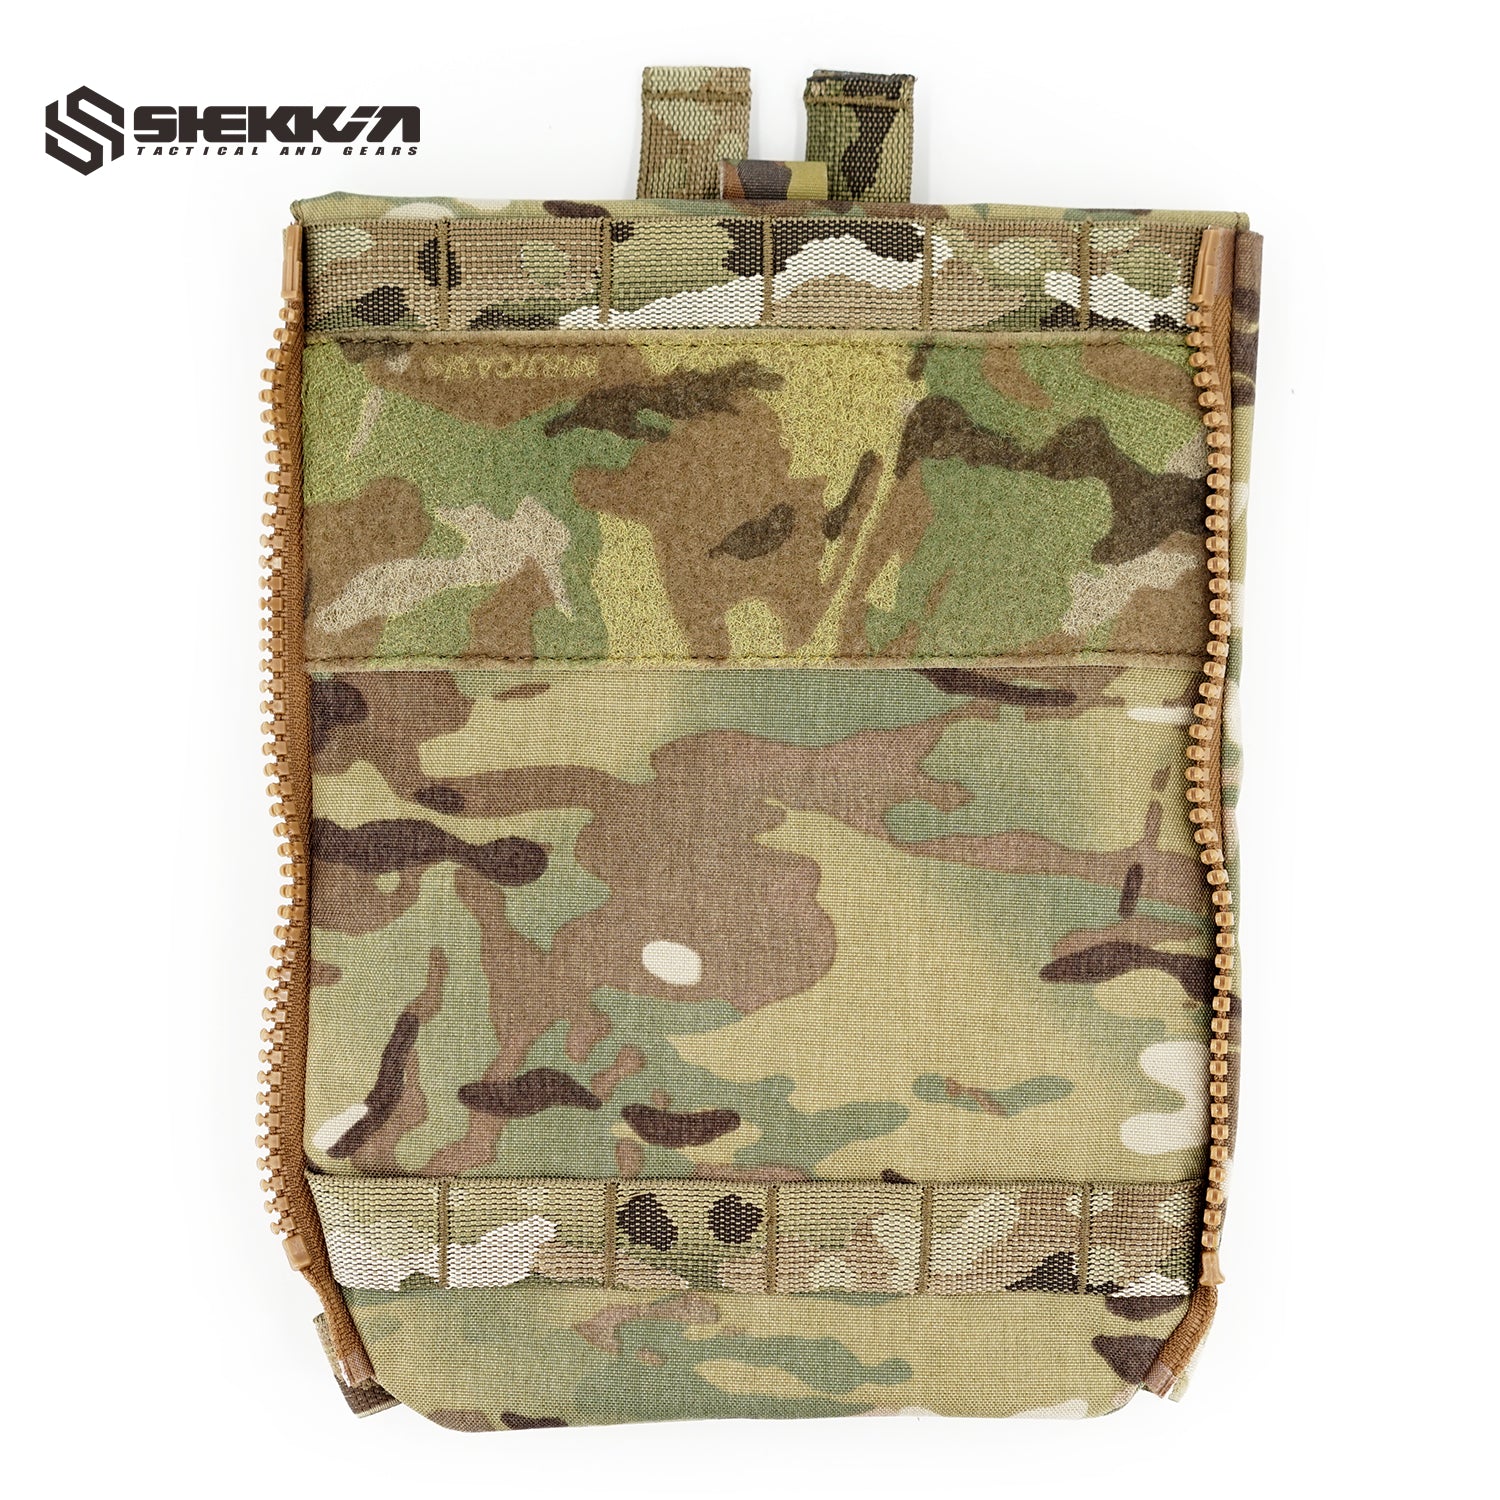 Stylish Plate Carriers | Shop Now at Shekkin Gears